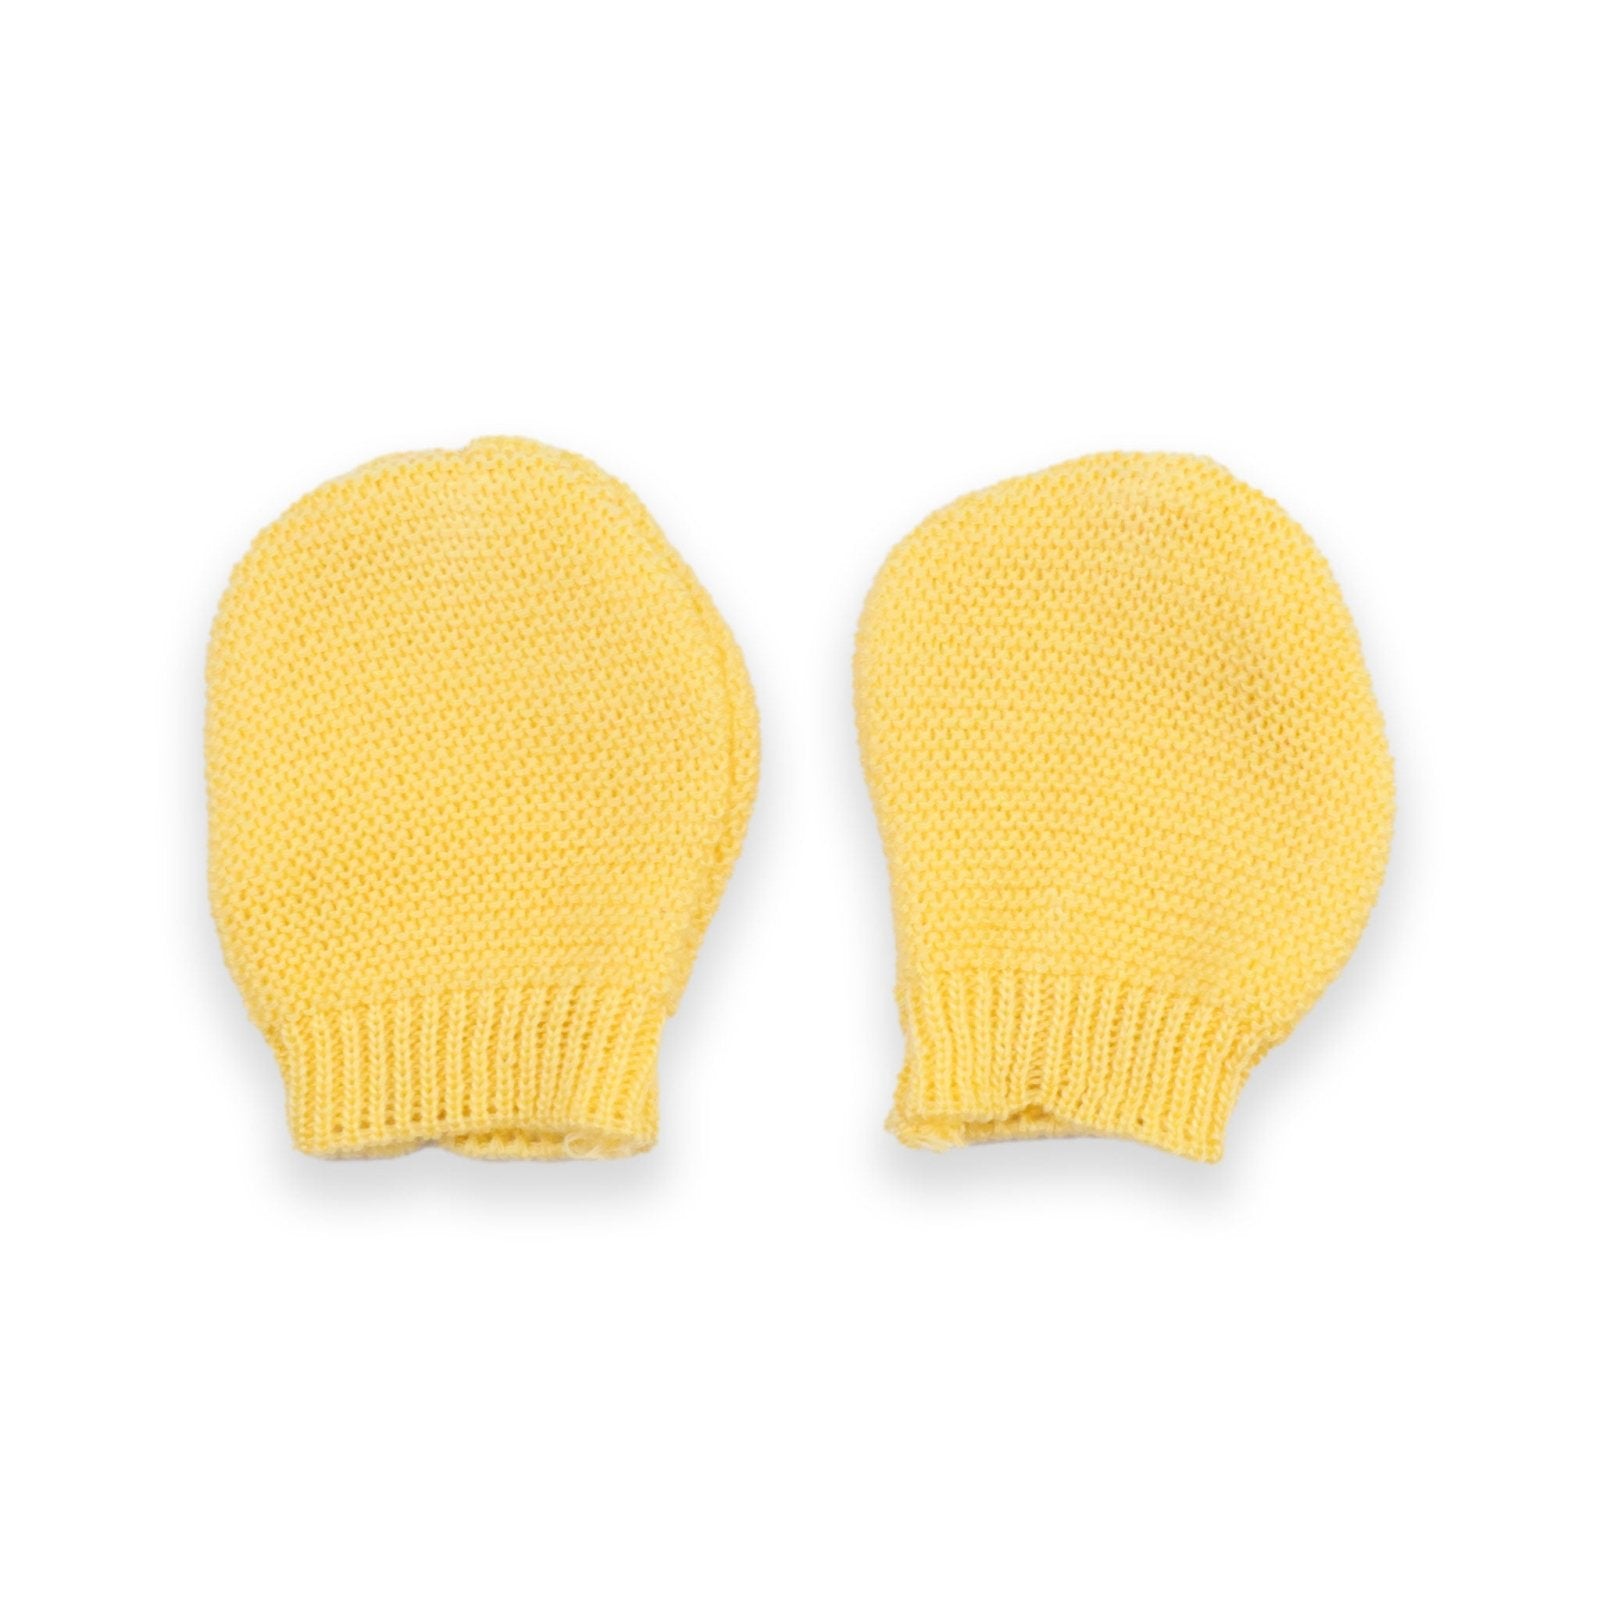 4 Pcs Woolen Gift Set Light Yellow Color by Little Darling